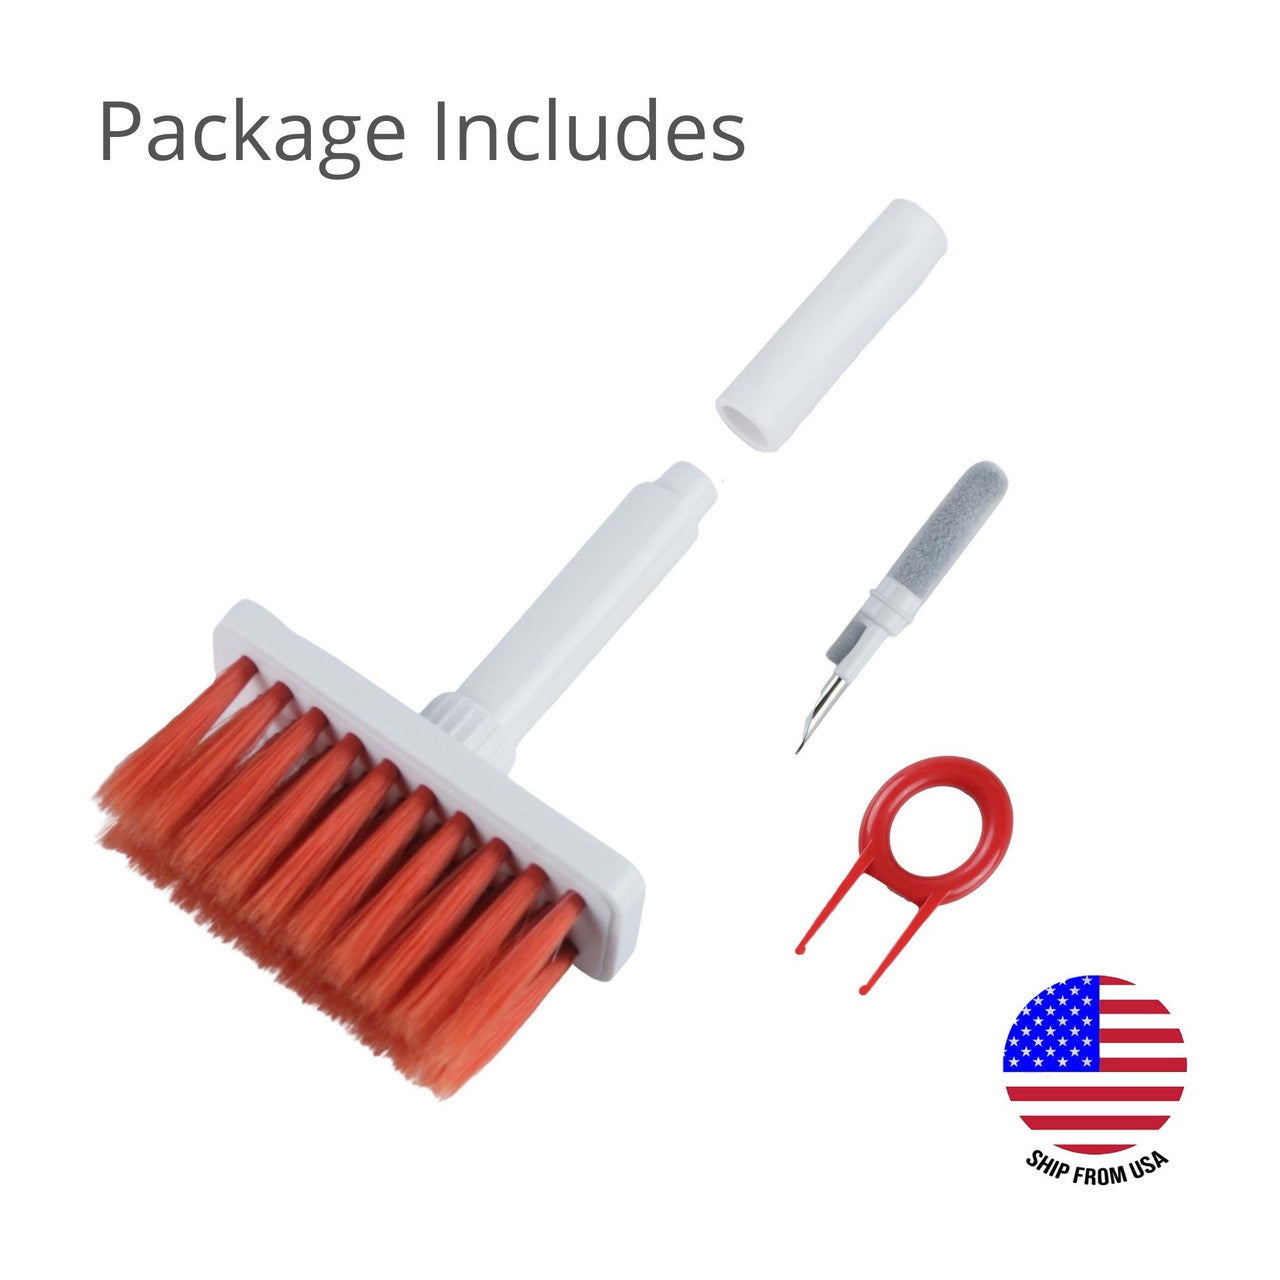 5 IN 1 PC Keyboard Cleaner Tools with a separated dual head design and soft brushes